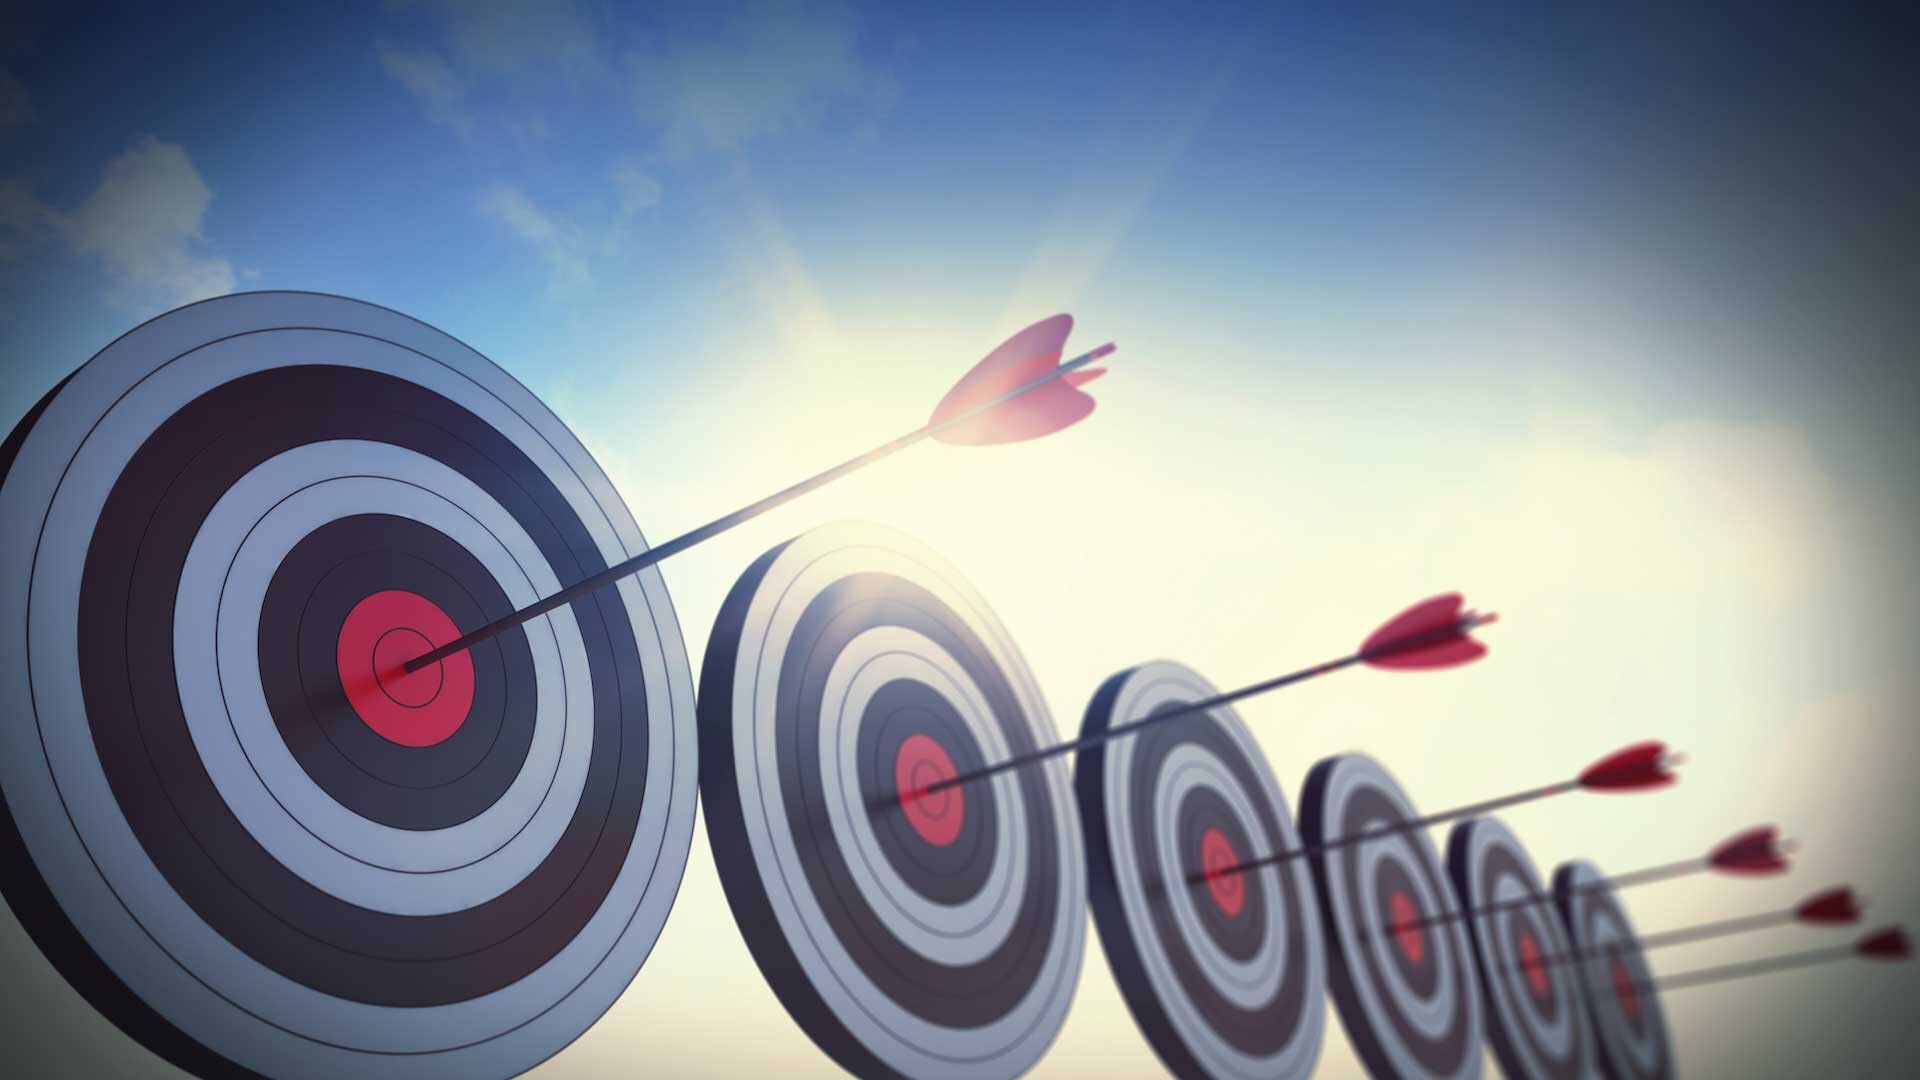 Goal (Aim): Line of targets, Achievement of objectives, Figurative meaning, Arrows. 1920x1080 Full HD Background.